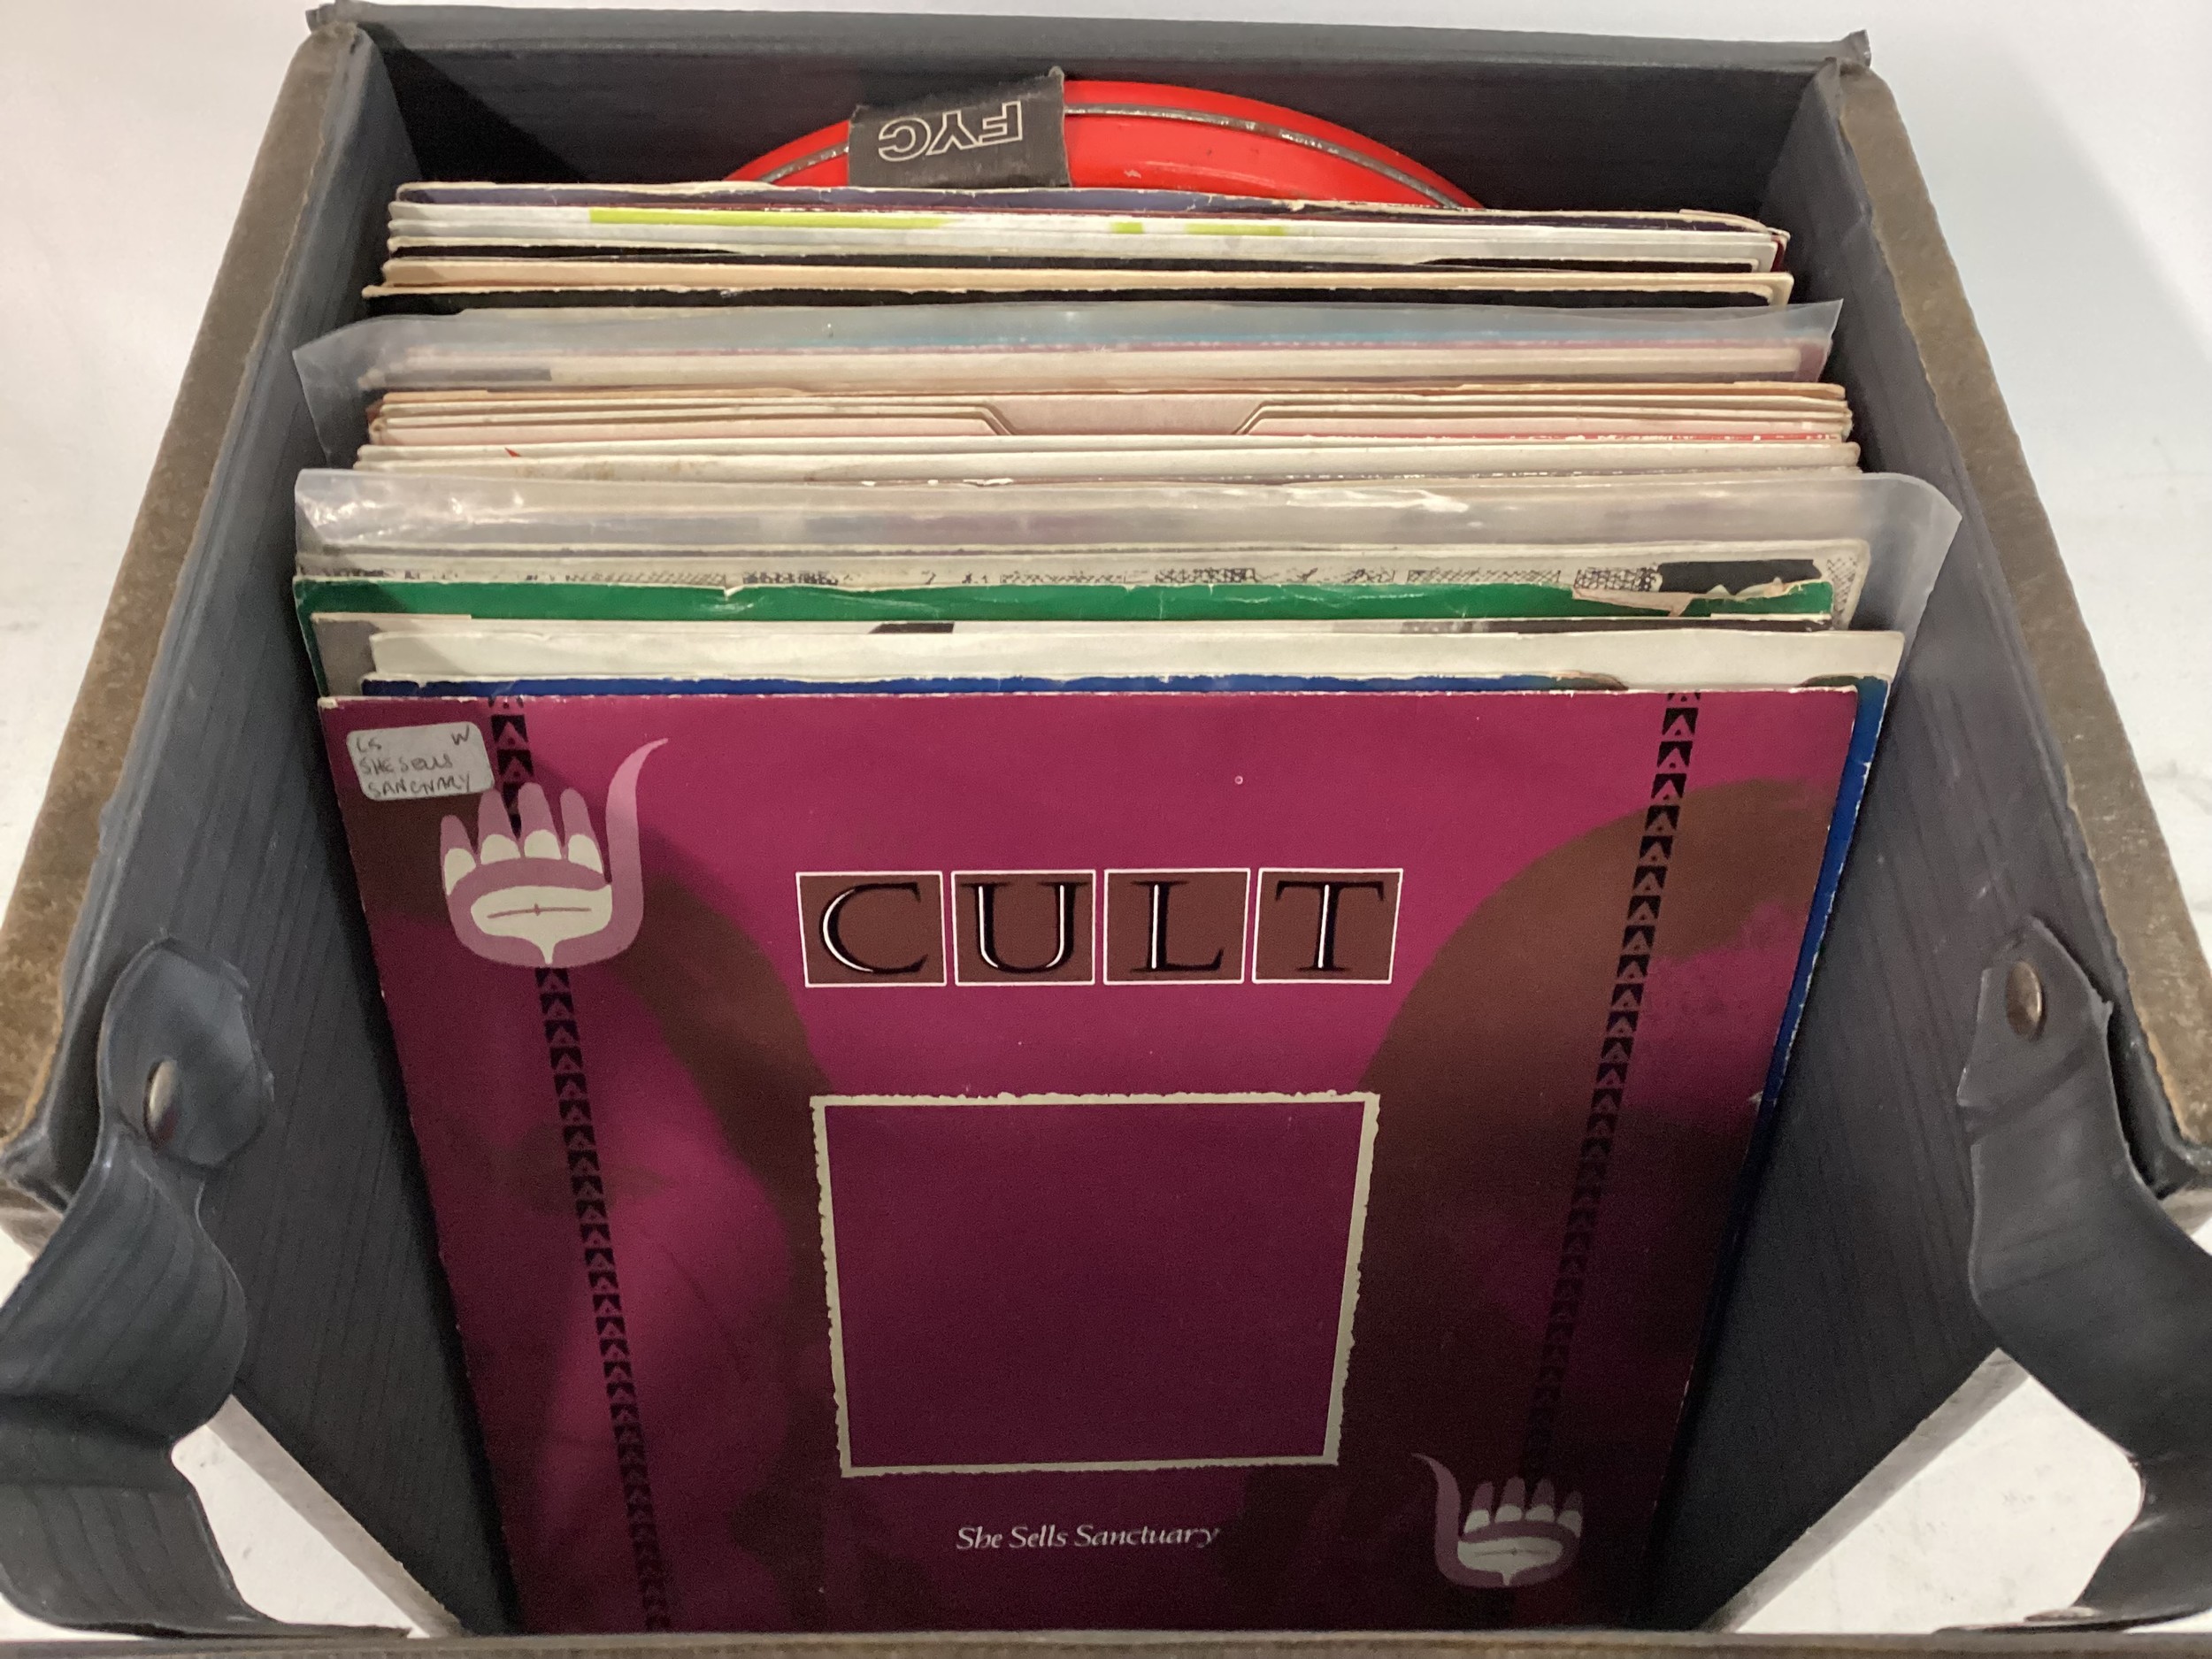 CASE OF MAINLY PUNK RELATED VINYL 7” SINGLES. Artists here include - The Cult - The Lambrettas -